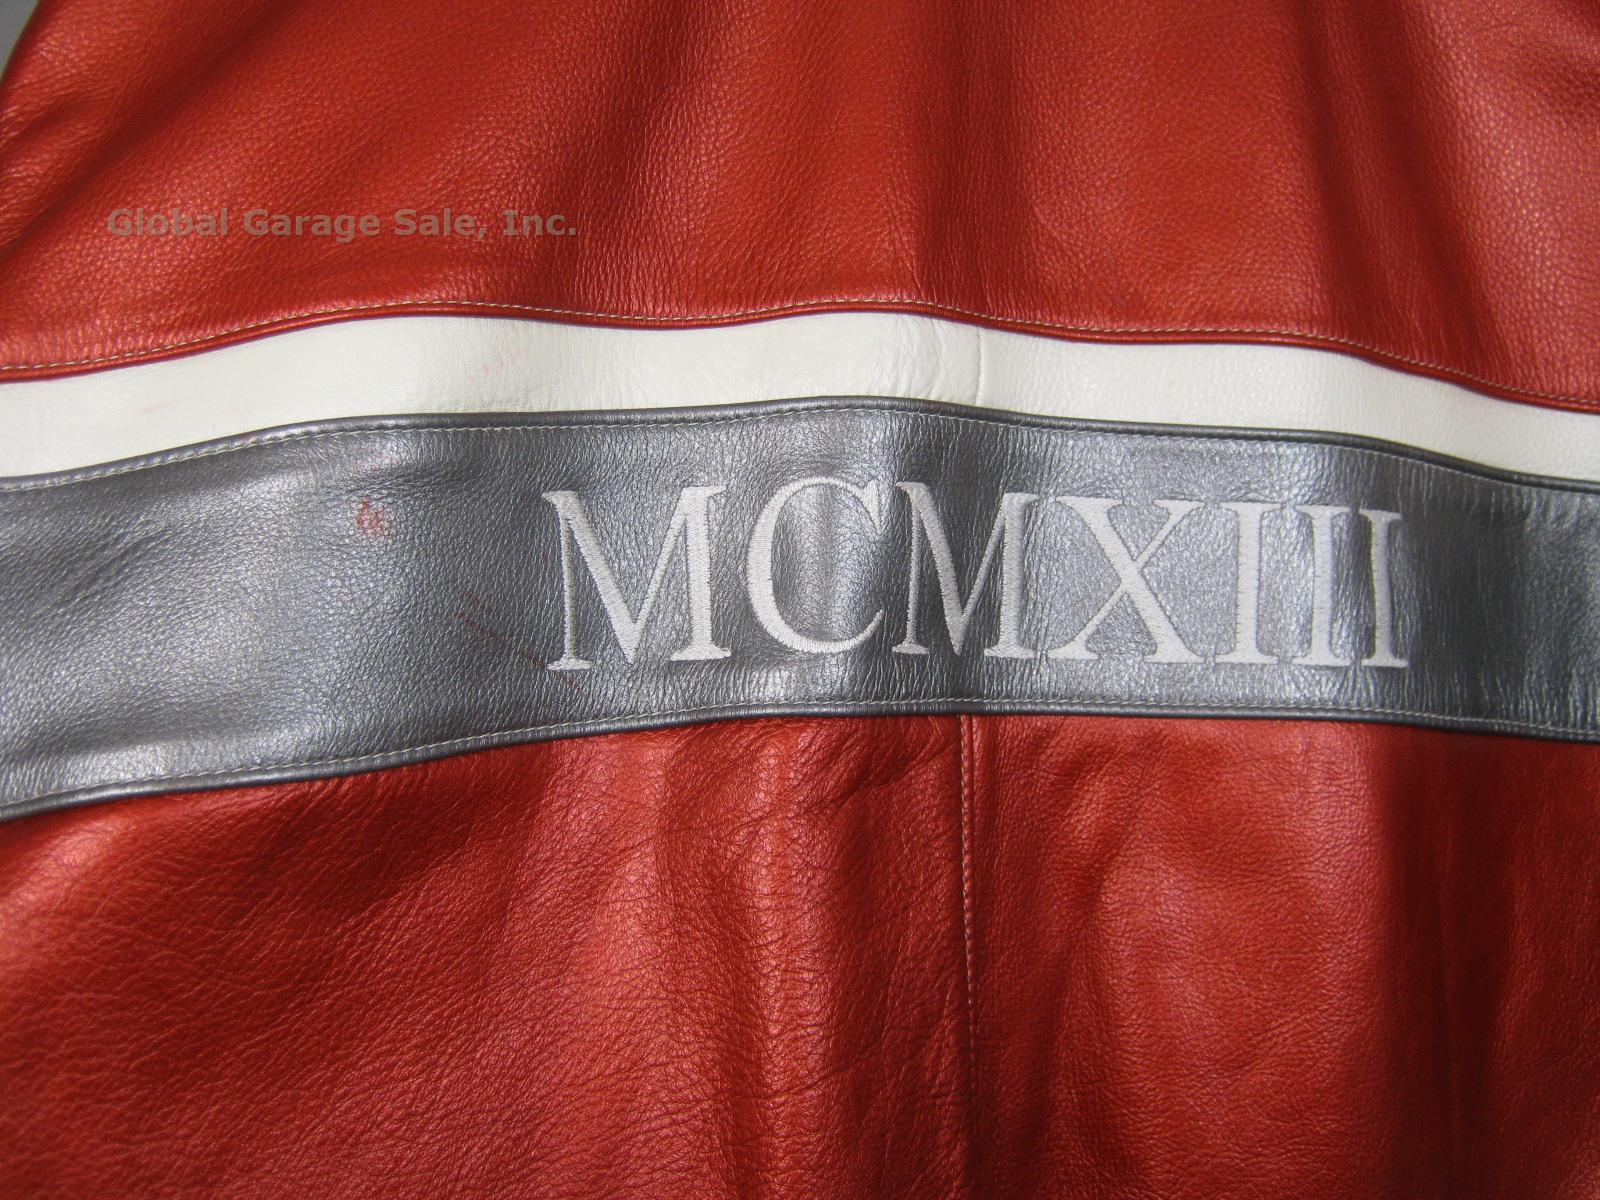 New Mens Schott MCMXIII 1913 Red Silver White Leather Motorcycle Jacket XXL 2XL 6